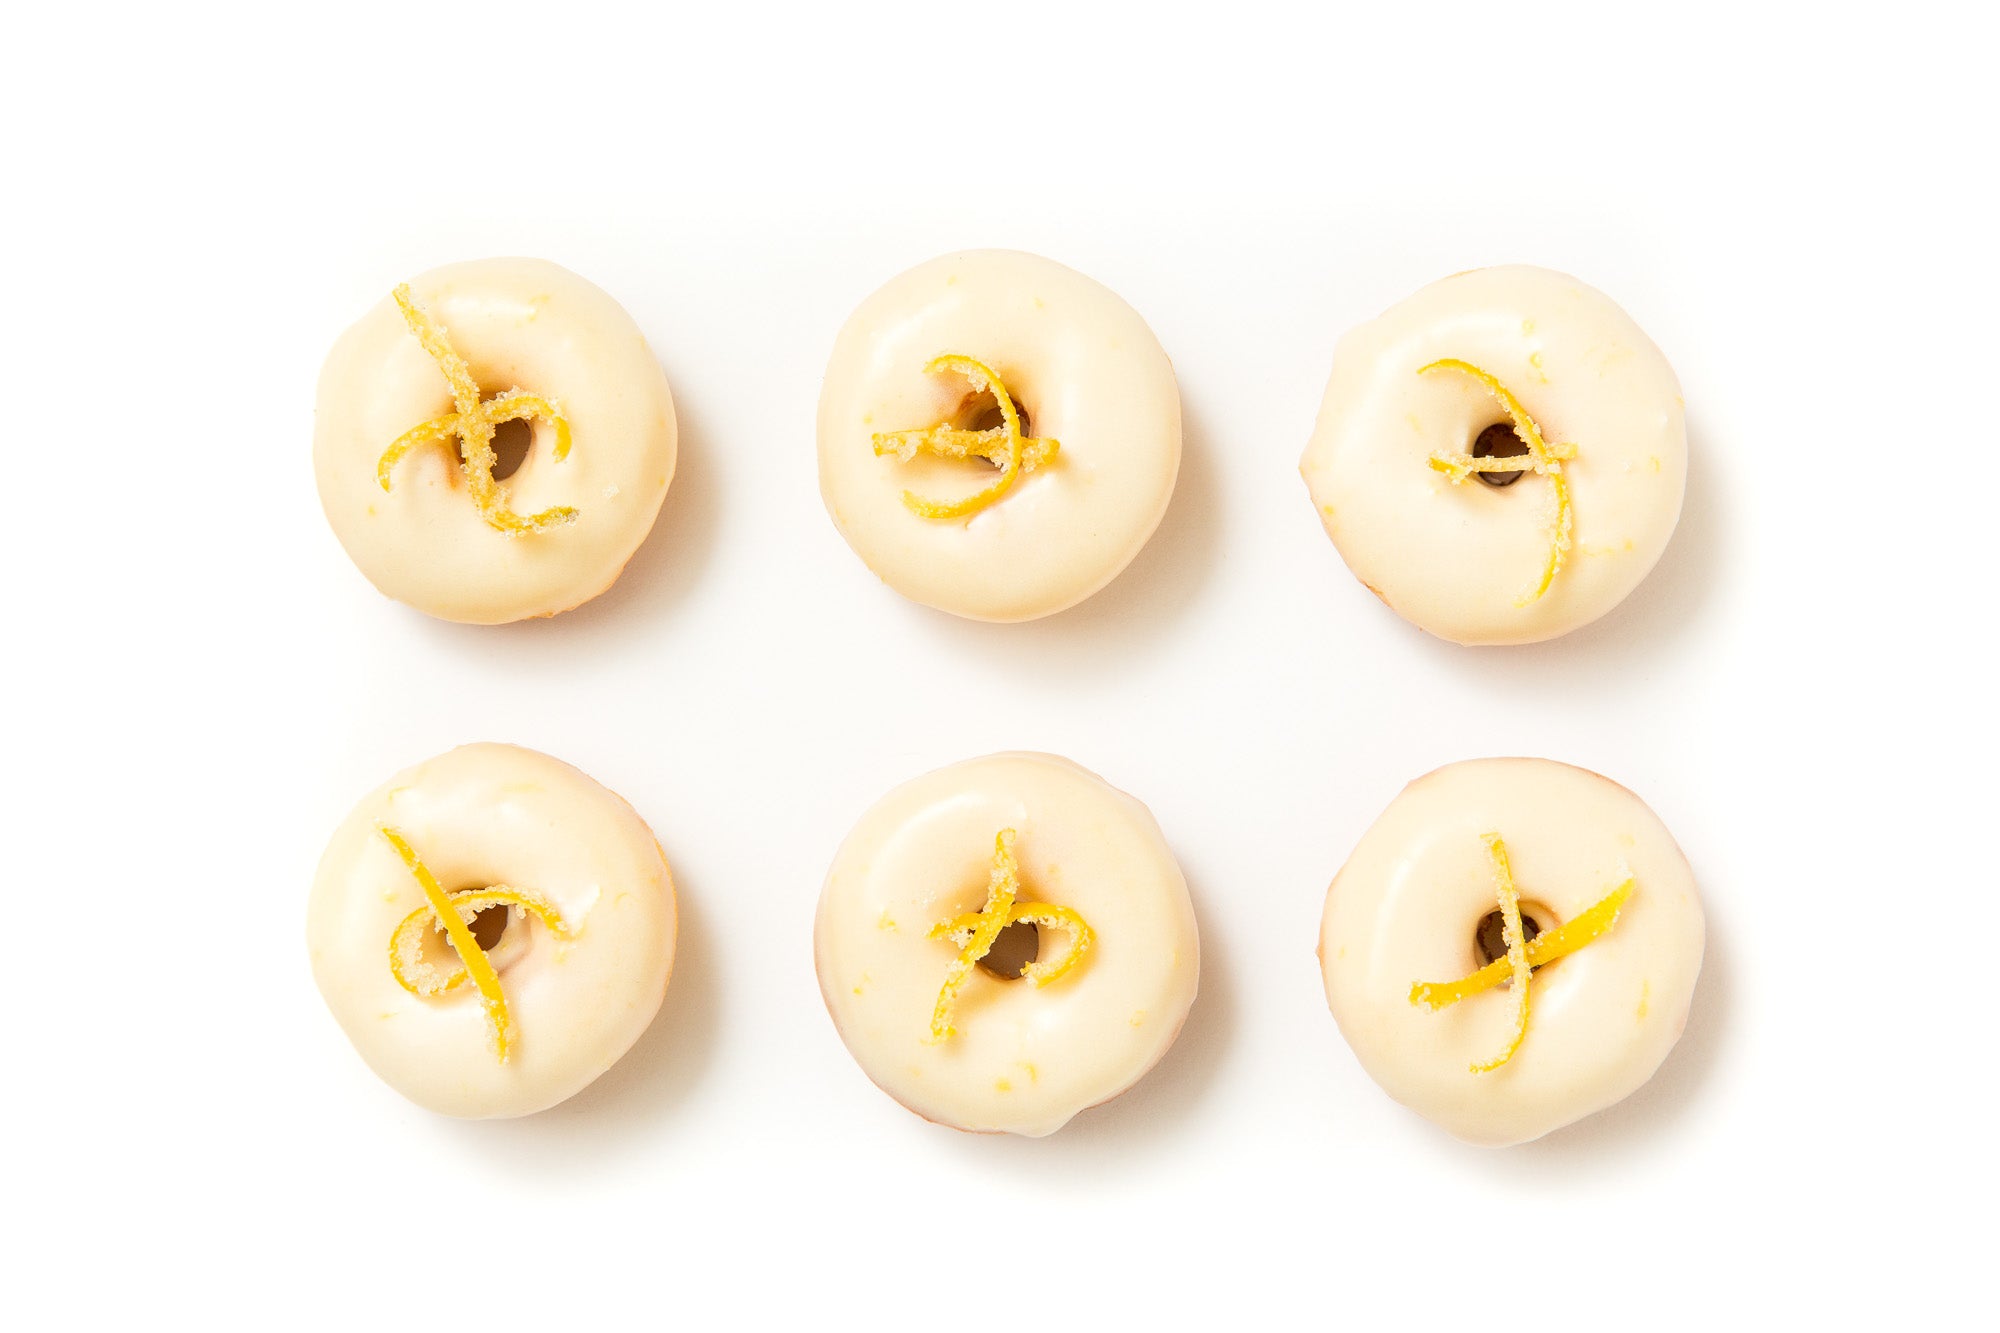 Image of six Miss Jones Baking Co Lemonade Donuts from above